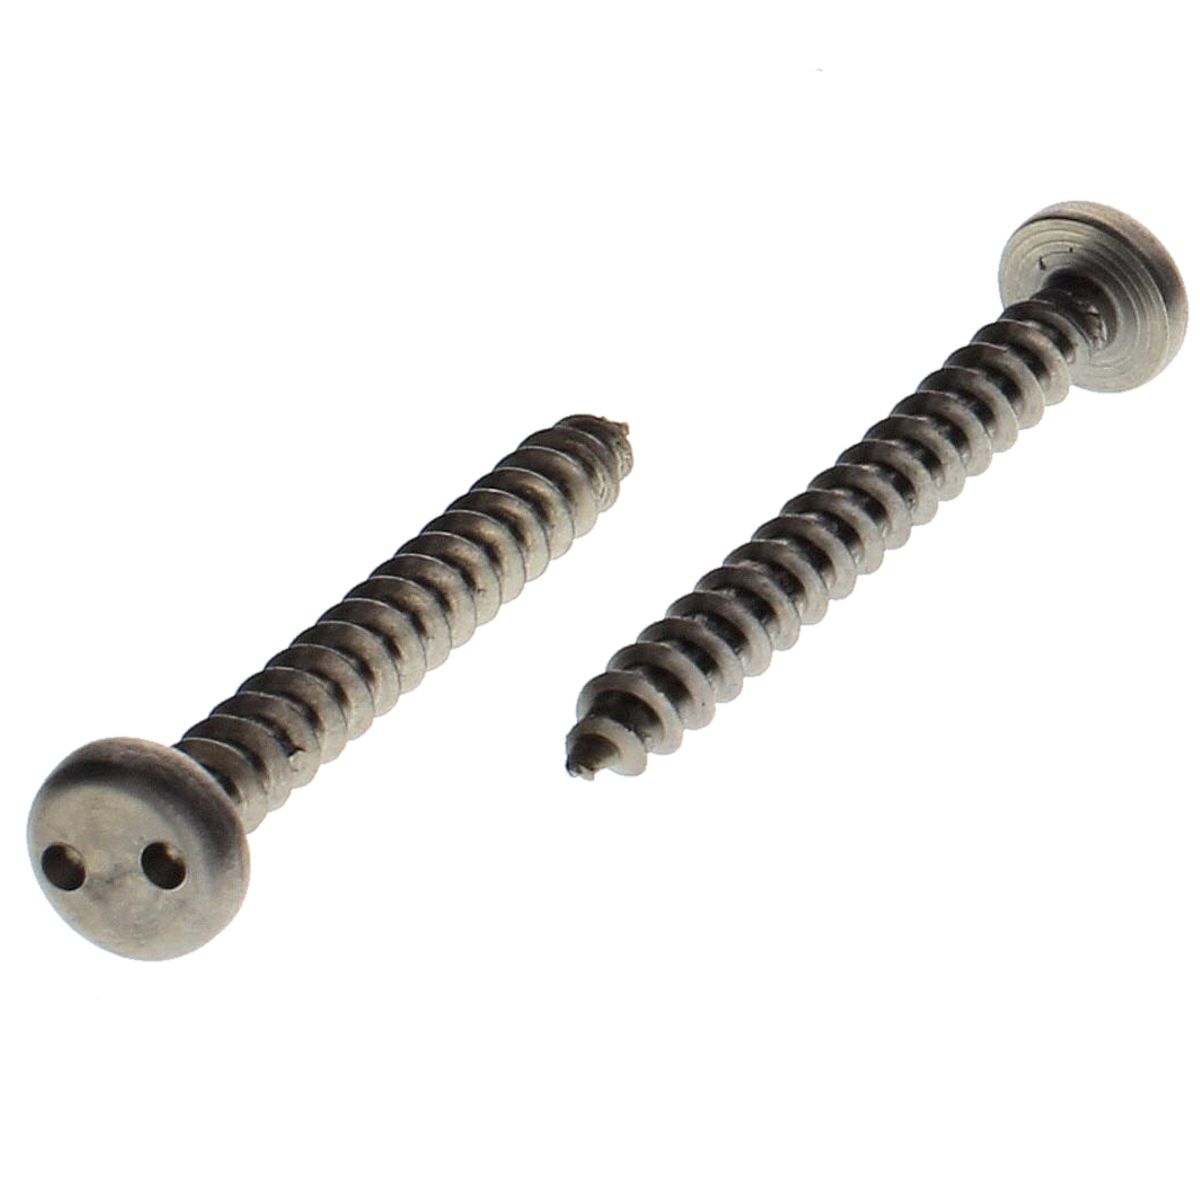 #14 x 1-1/2" Pan Head Spanner Security Tapping Screws — 18-8 Stainless Steel, 100/PKG